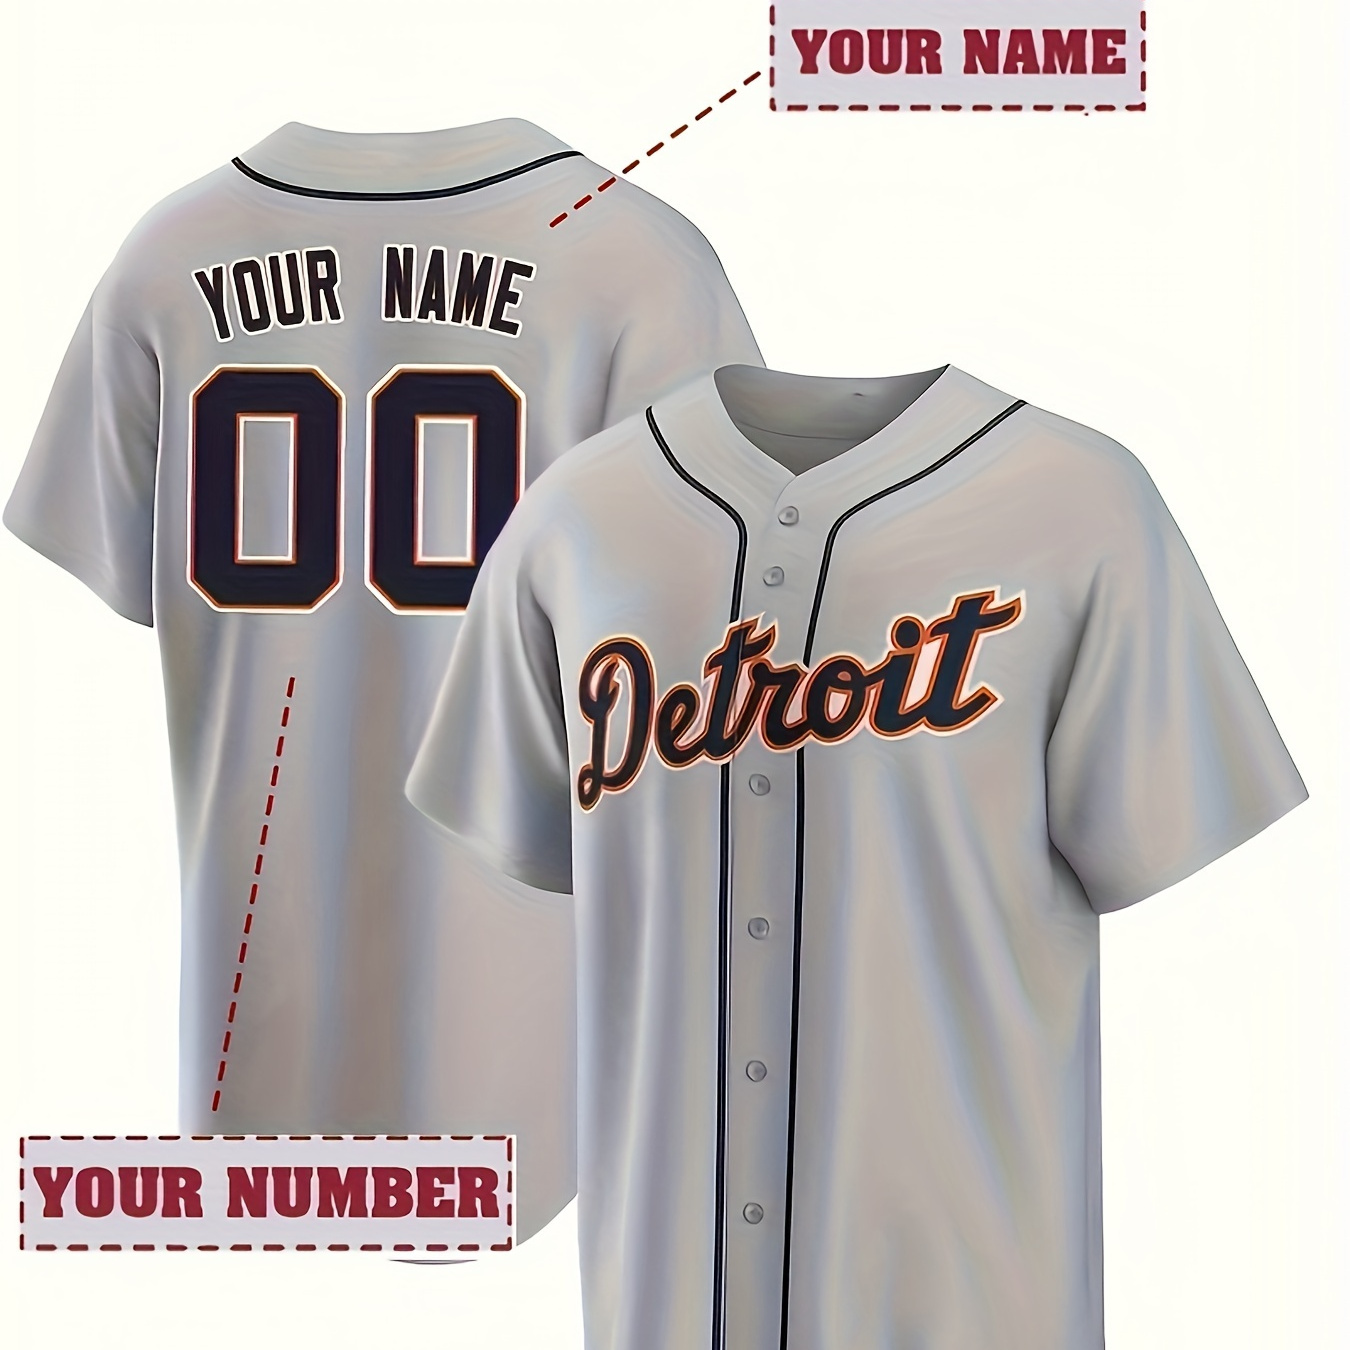 

Men's Customized Name And Number Design Jersey, Men's Short Sleeve Loose Breathable V-neck Embroidery Baseball Jersey, Sports Shirt For Team Training